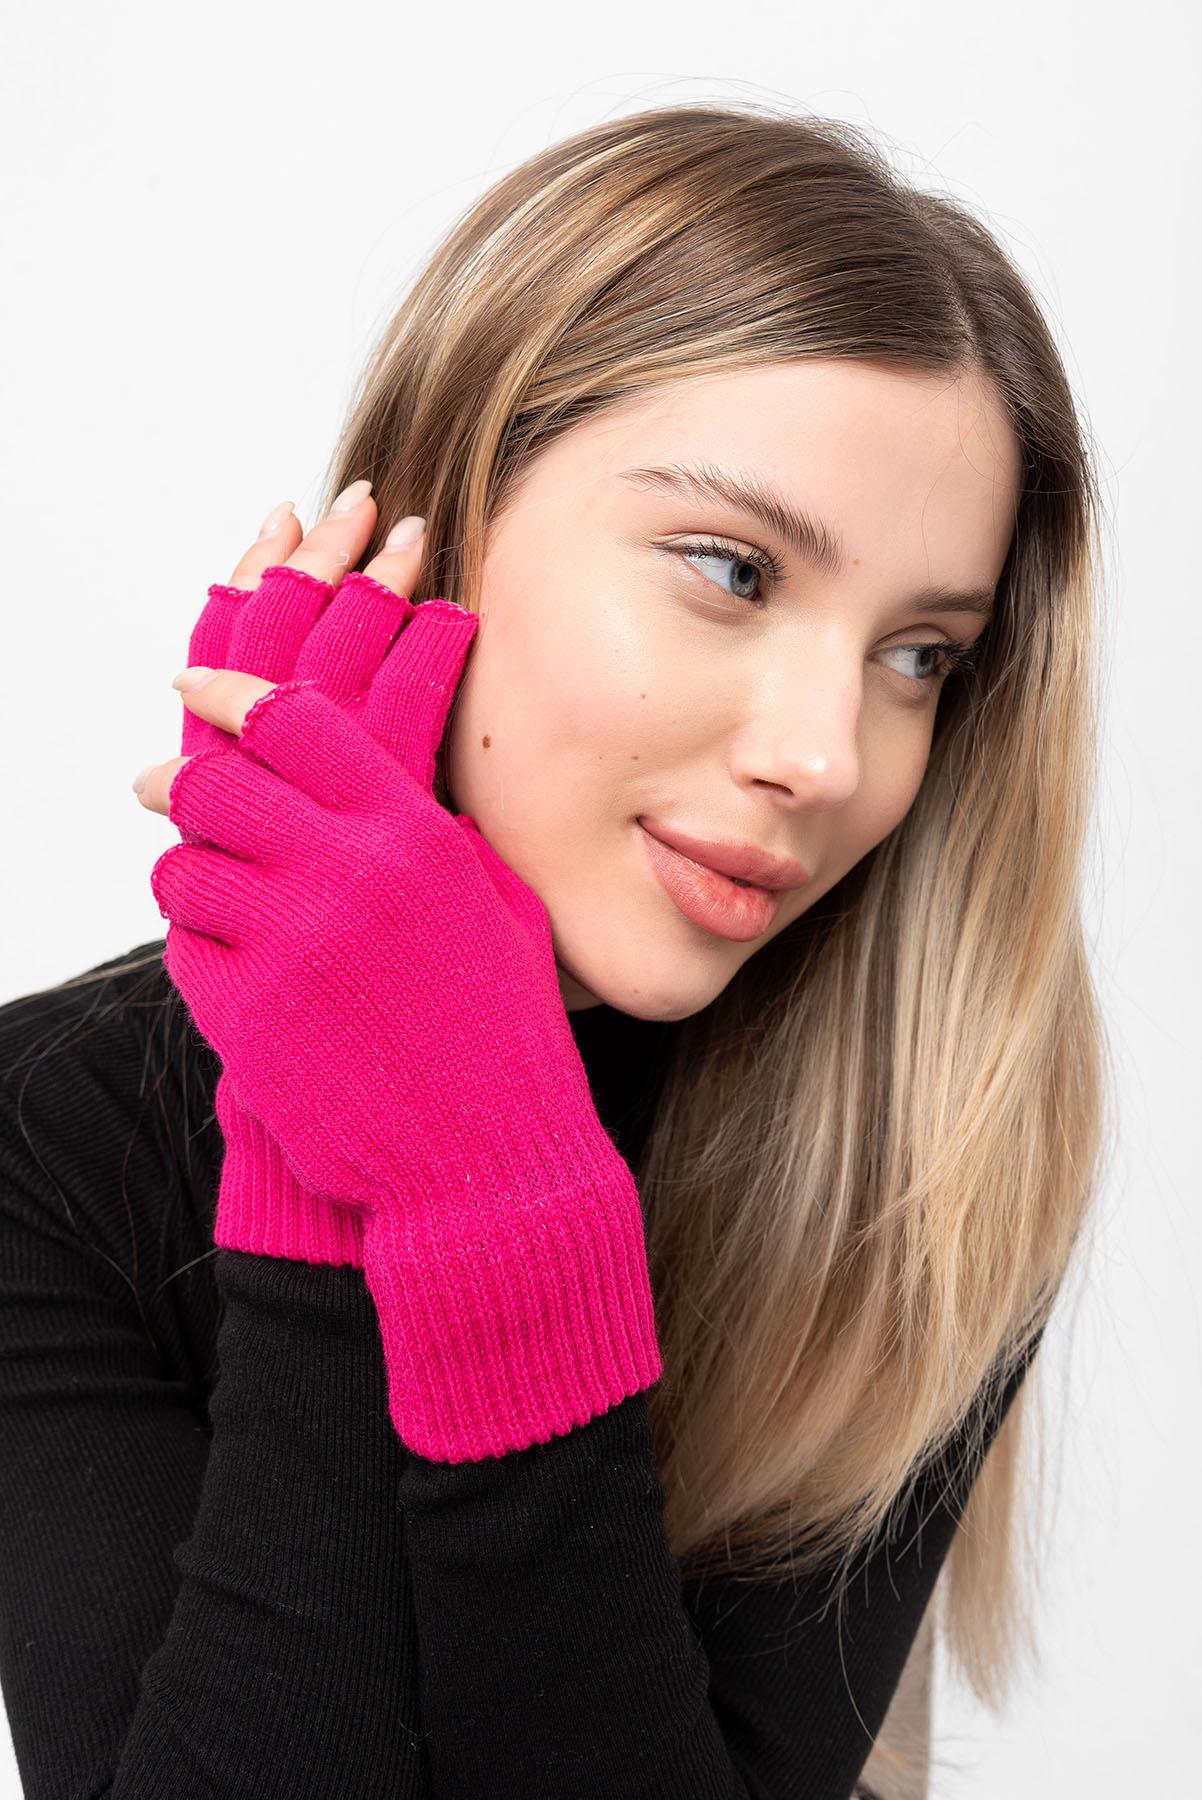 A model wears NSV11222 - Cut Knitwear Gloves - Fuchsia, wholesale Glove of Nesvay to display at Lonca